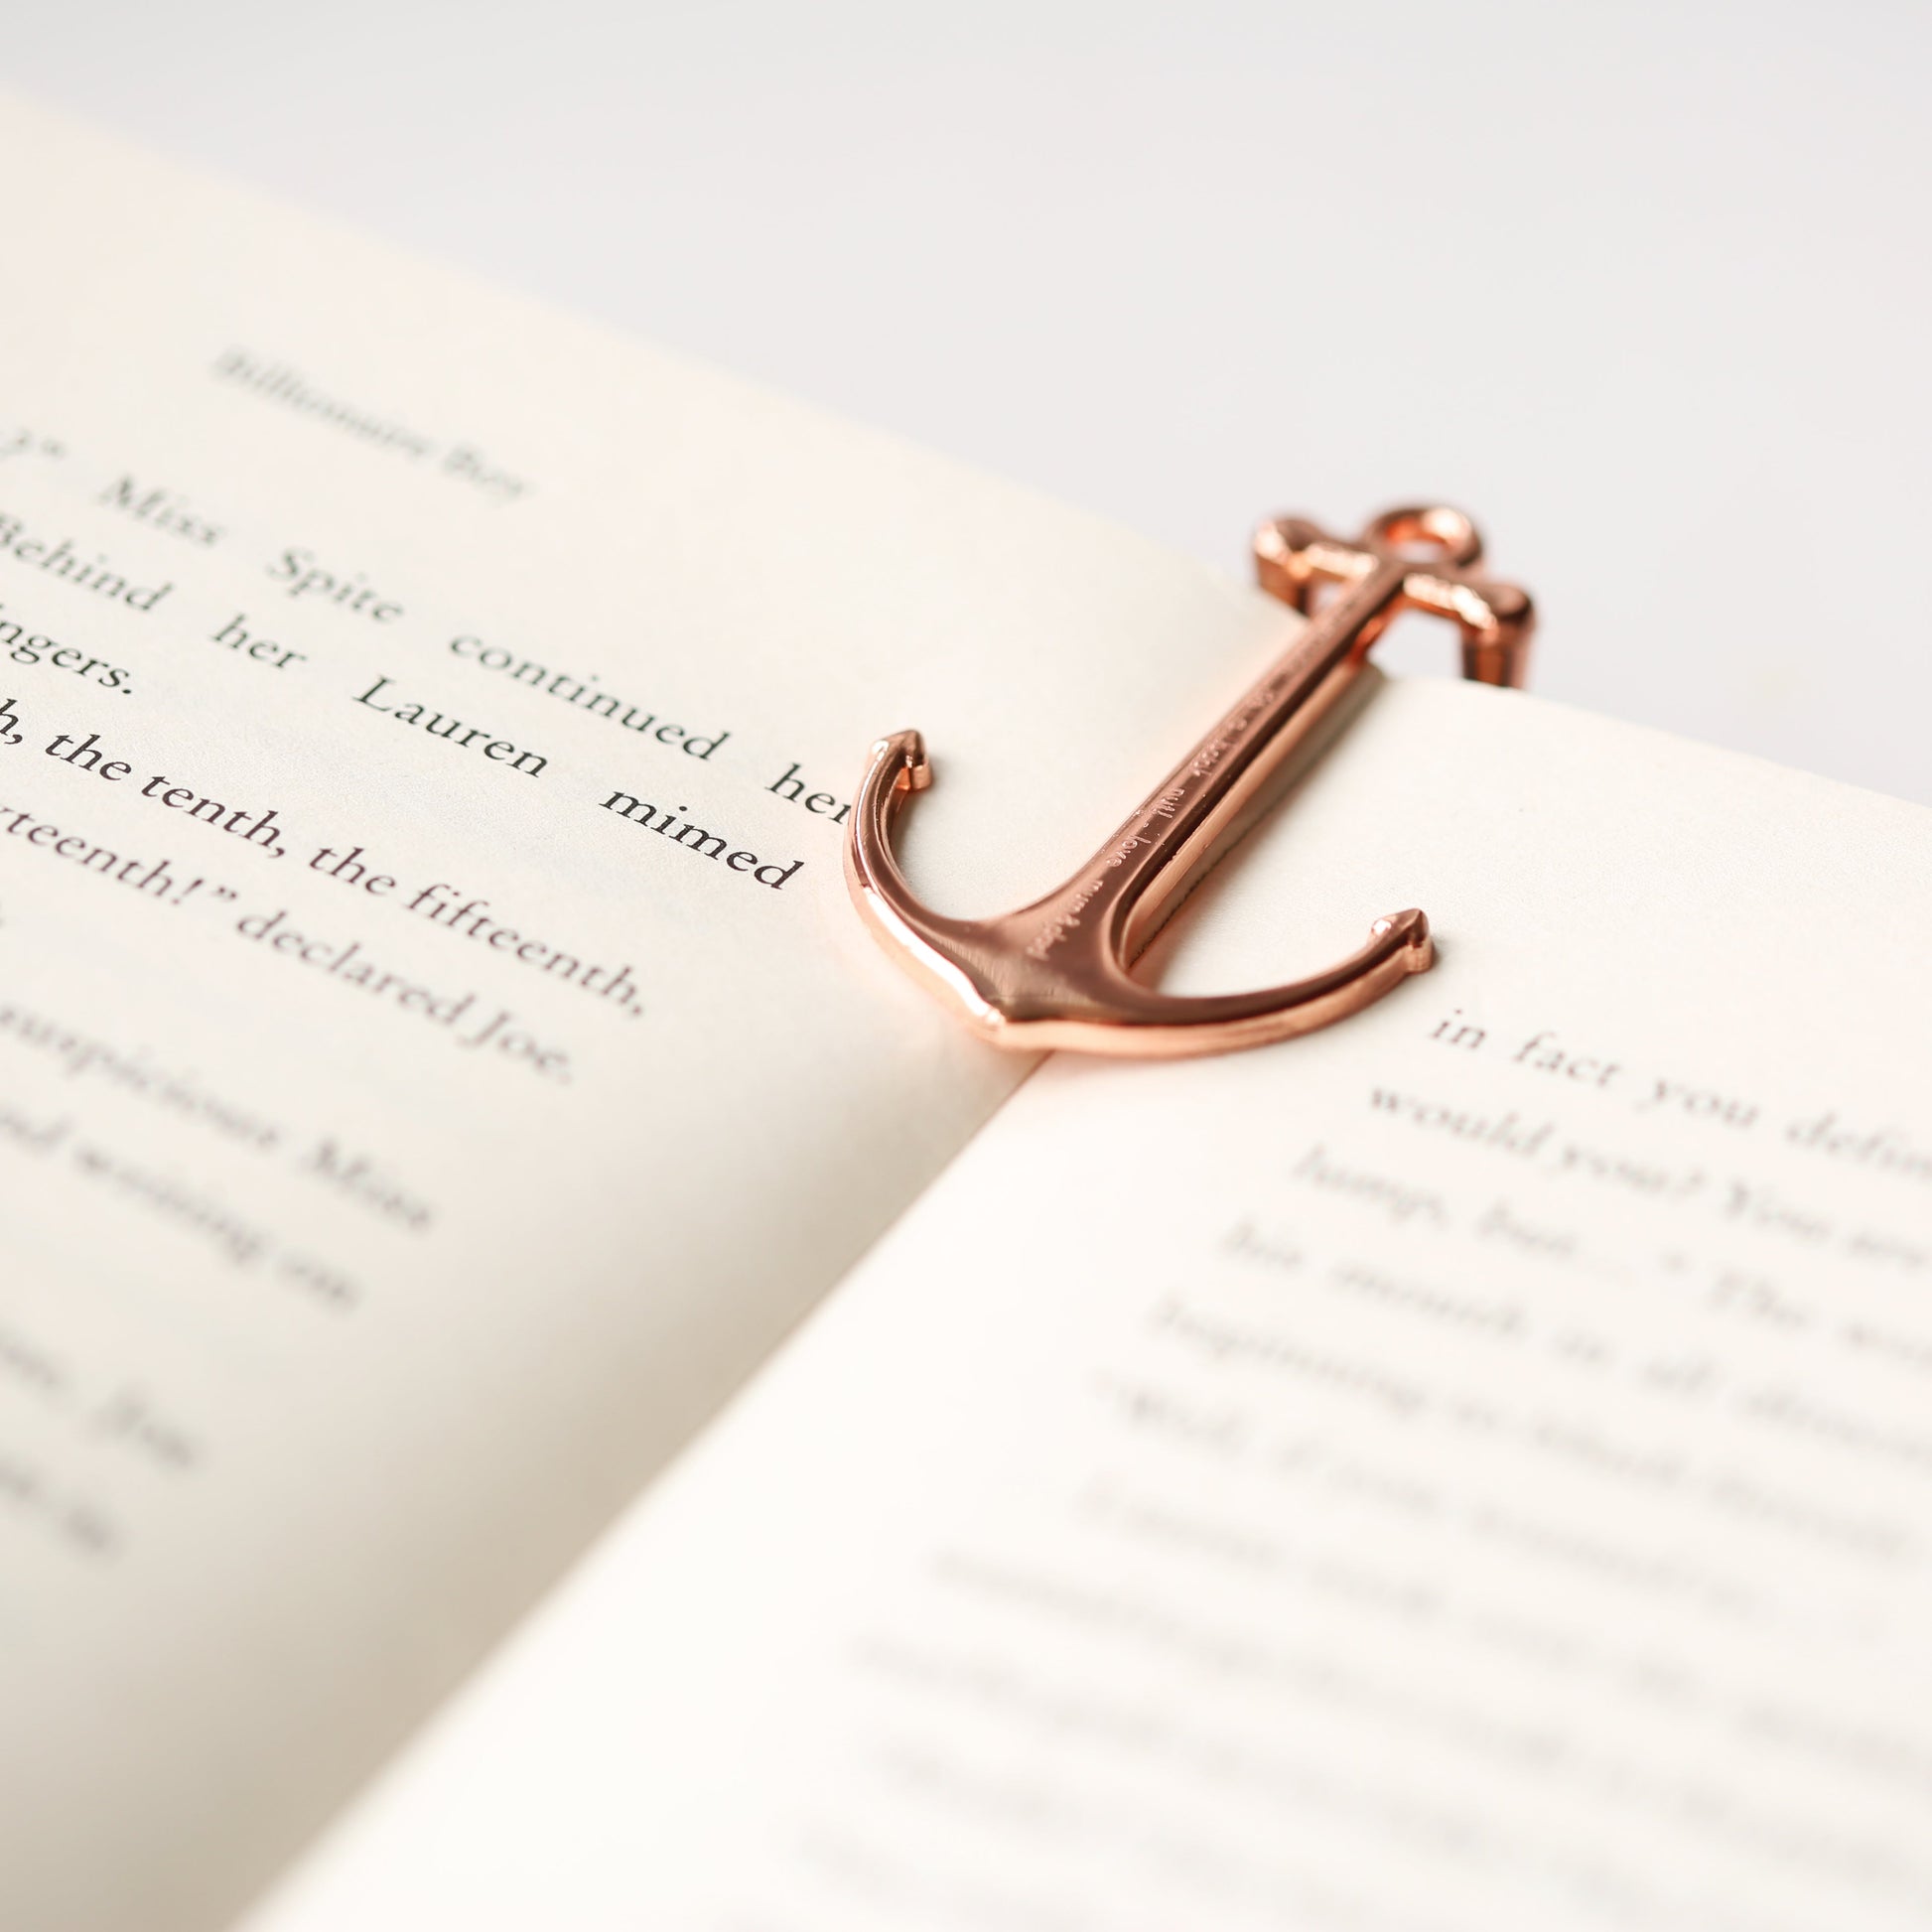 Personalized Book Anchor - Book Anchor - Gold & Rose Gold 